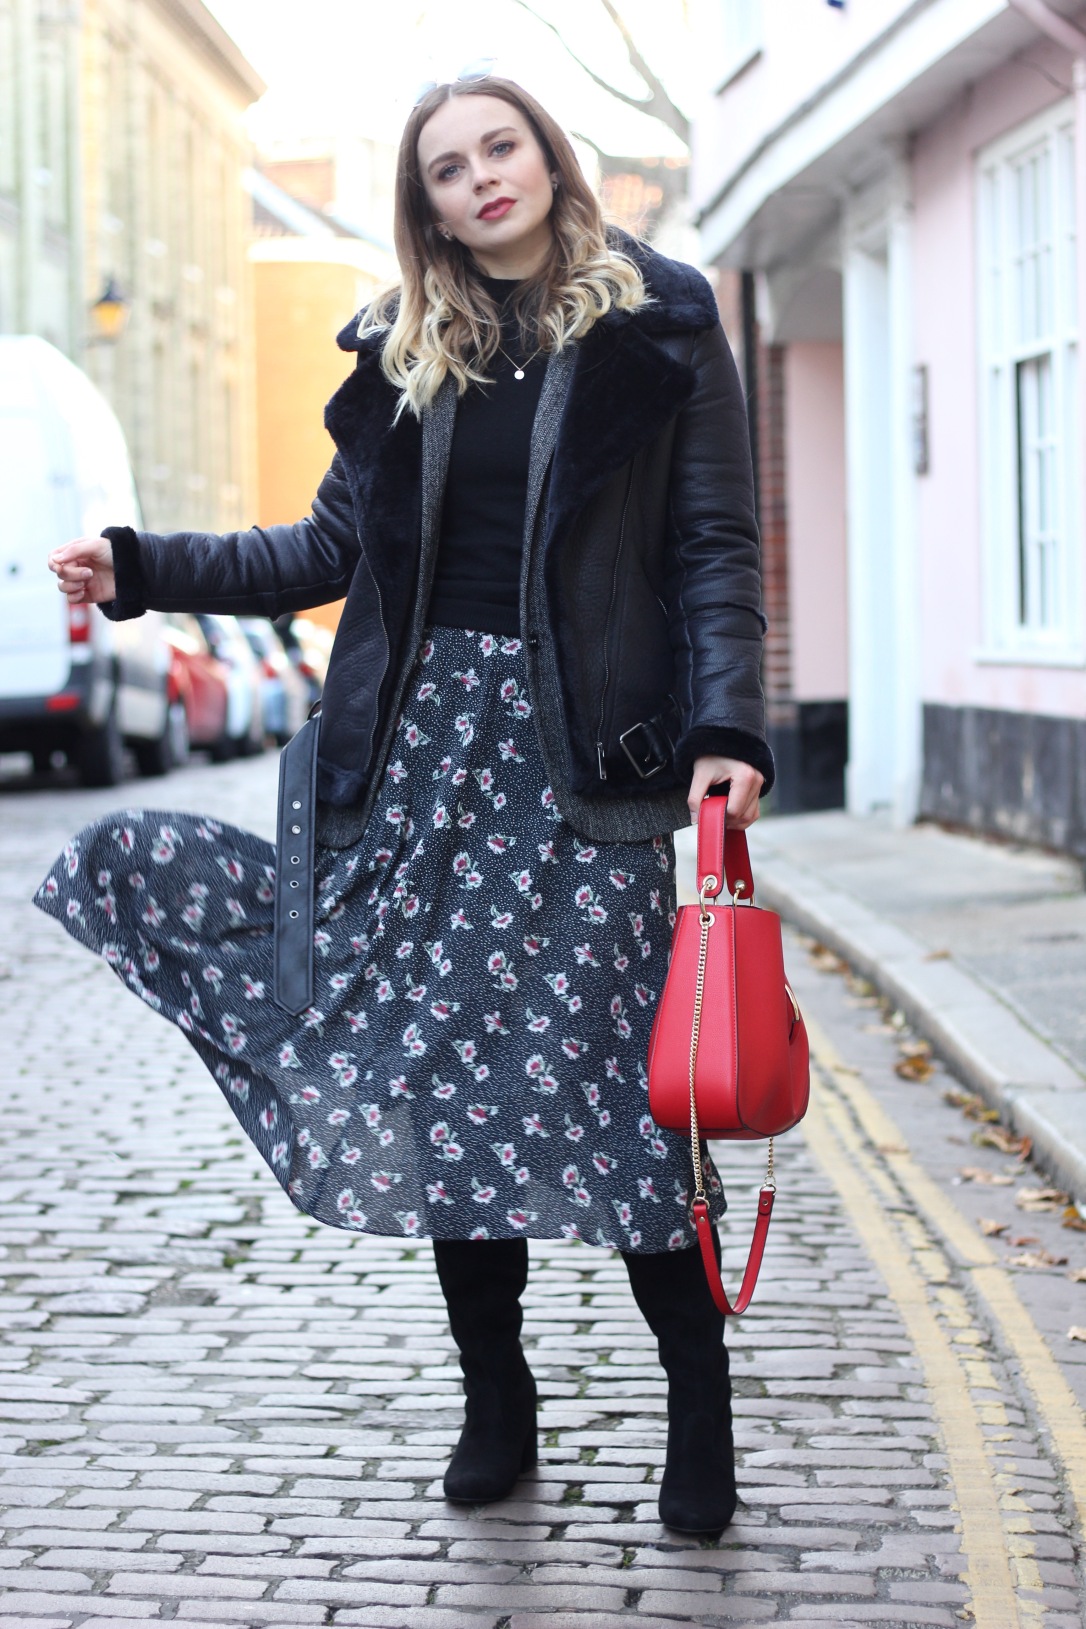 How to style a midi dress in winter